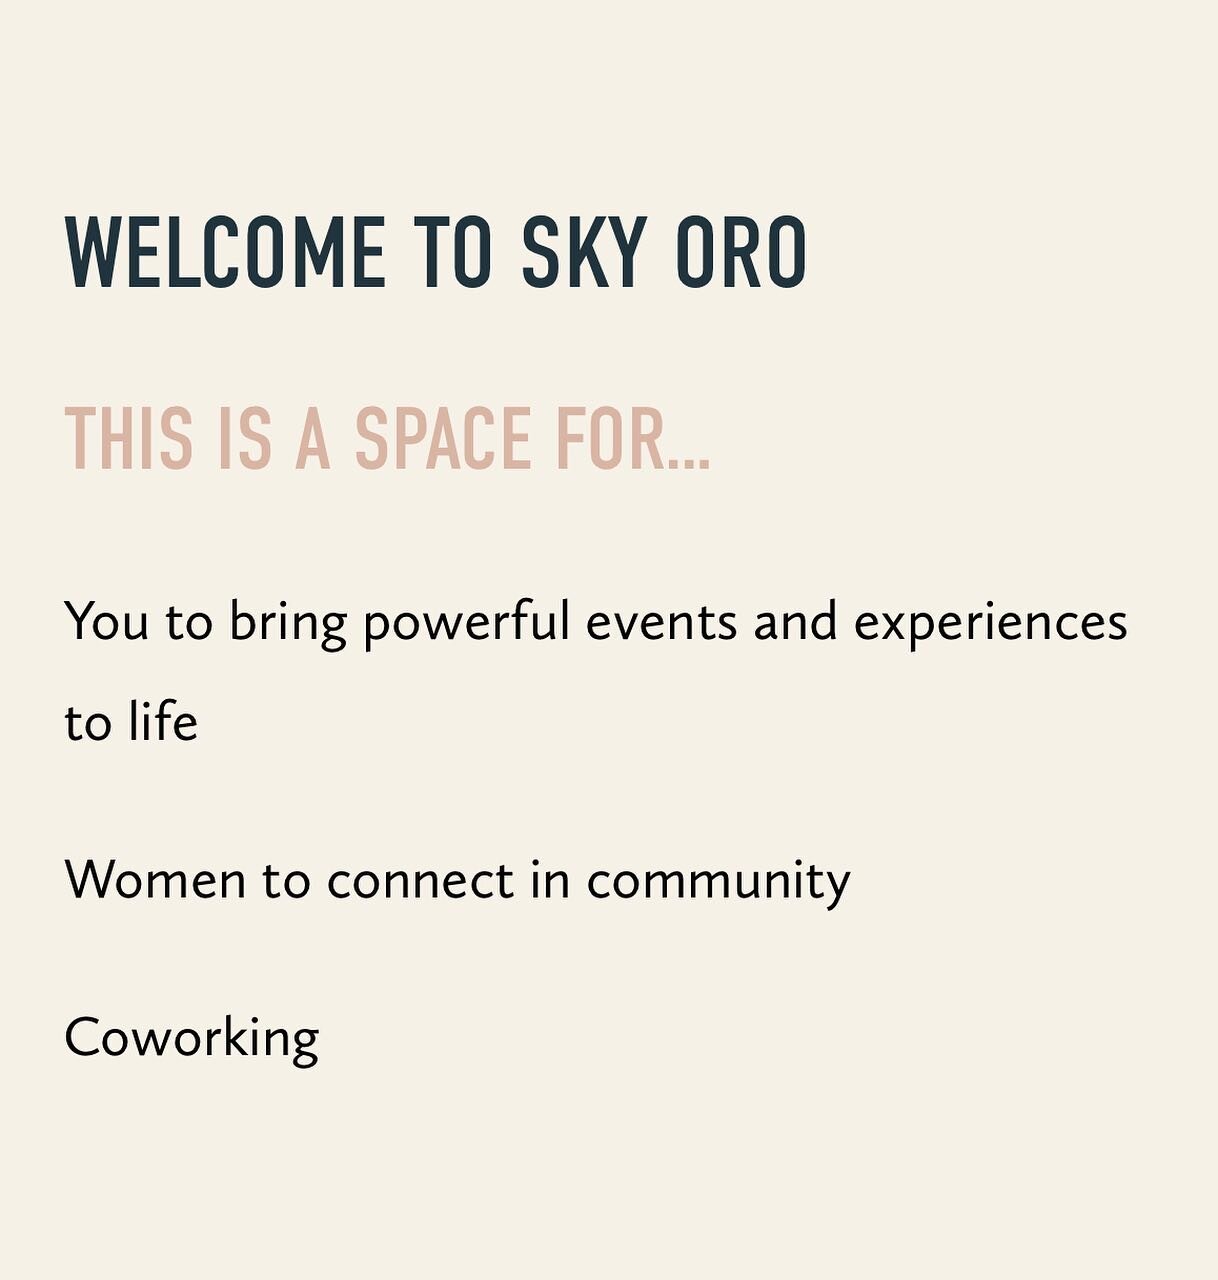 Sky Oro is Montana&rsquo;s premiere community, events and coworking space designed for womxn by womxn!

We have a variety of easy ways for you to get involved:

🗓️ join us for an event
👩&zwj;💻 work with us for a day, a week, a month or longer!
🙋&